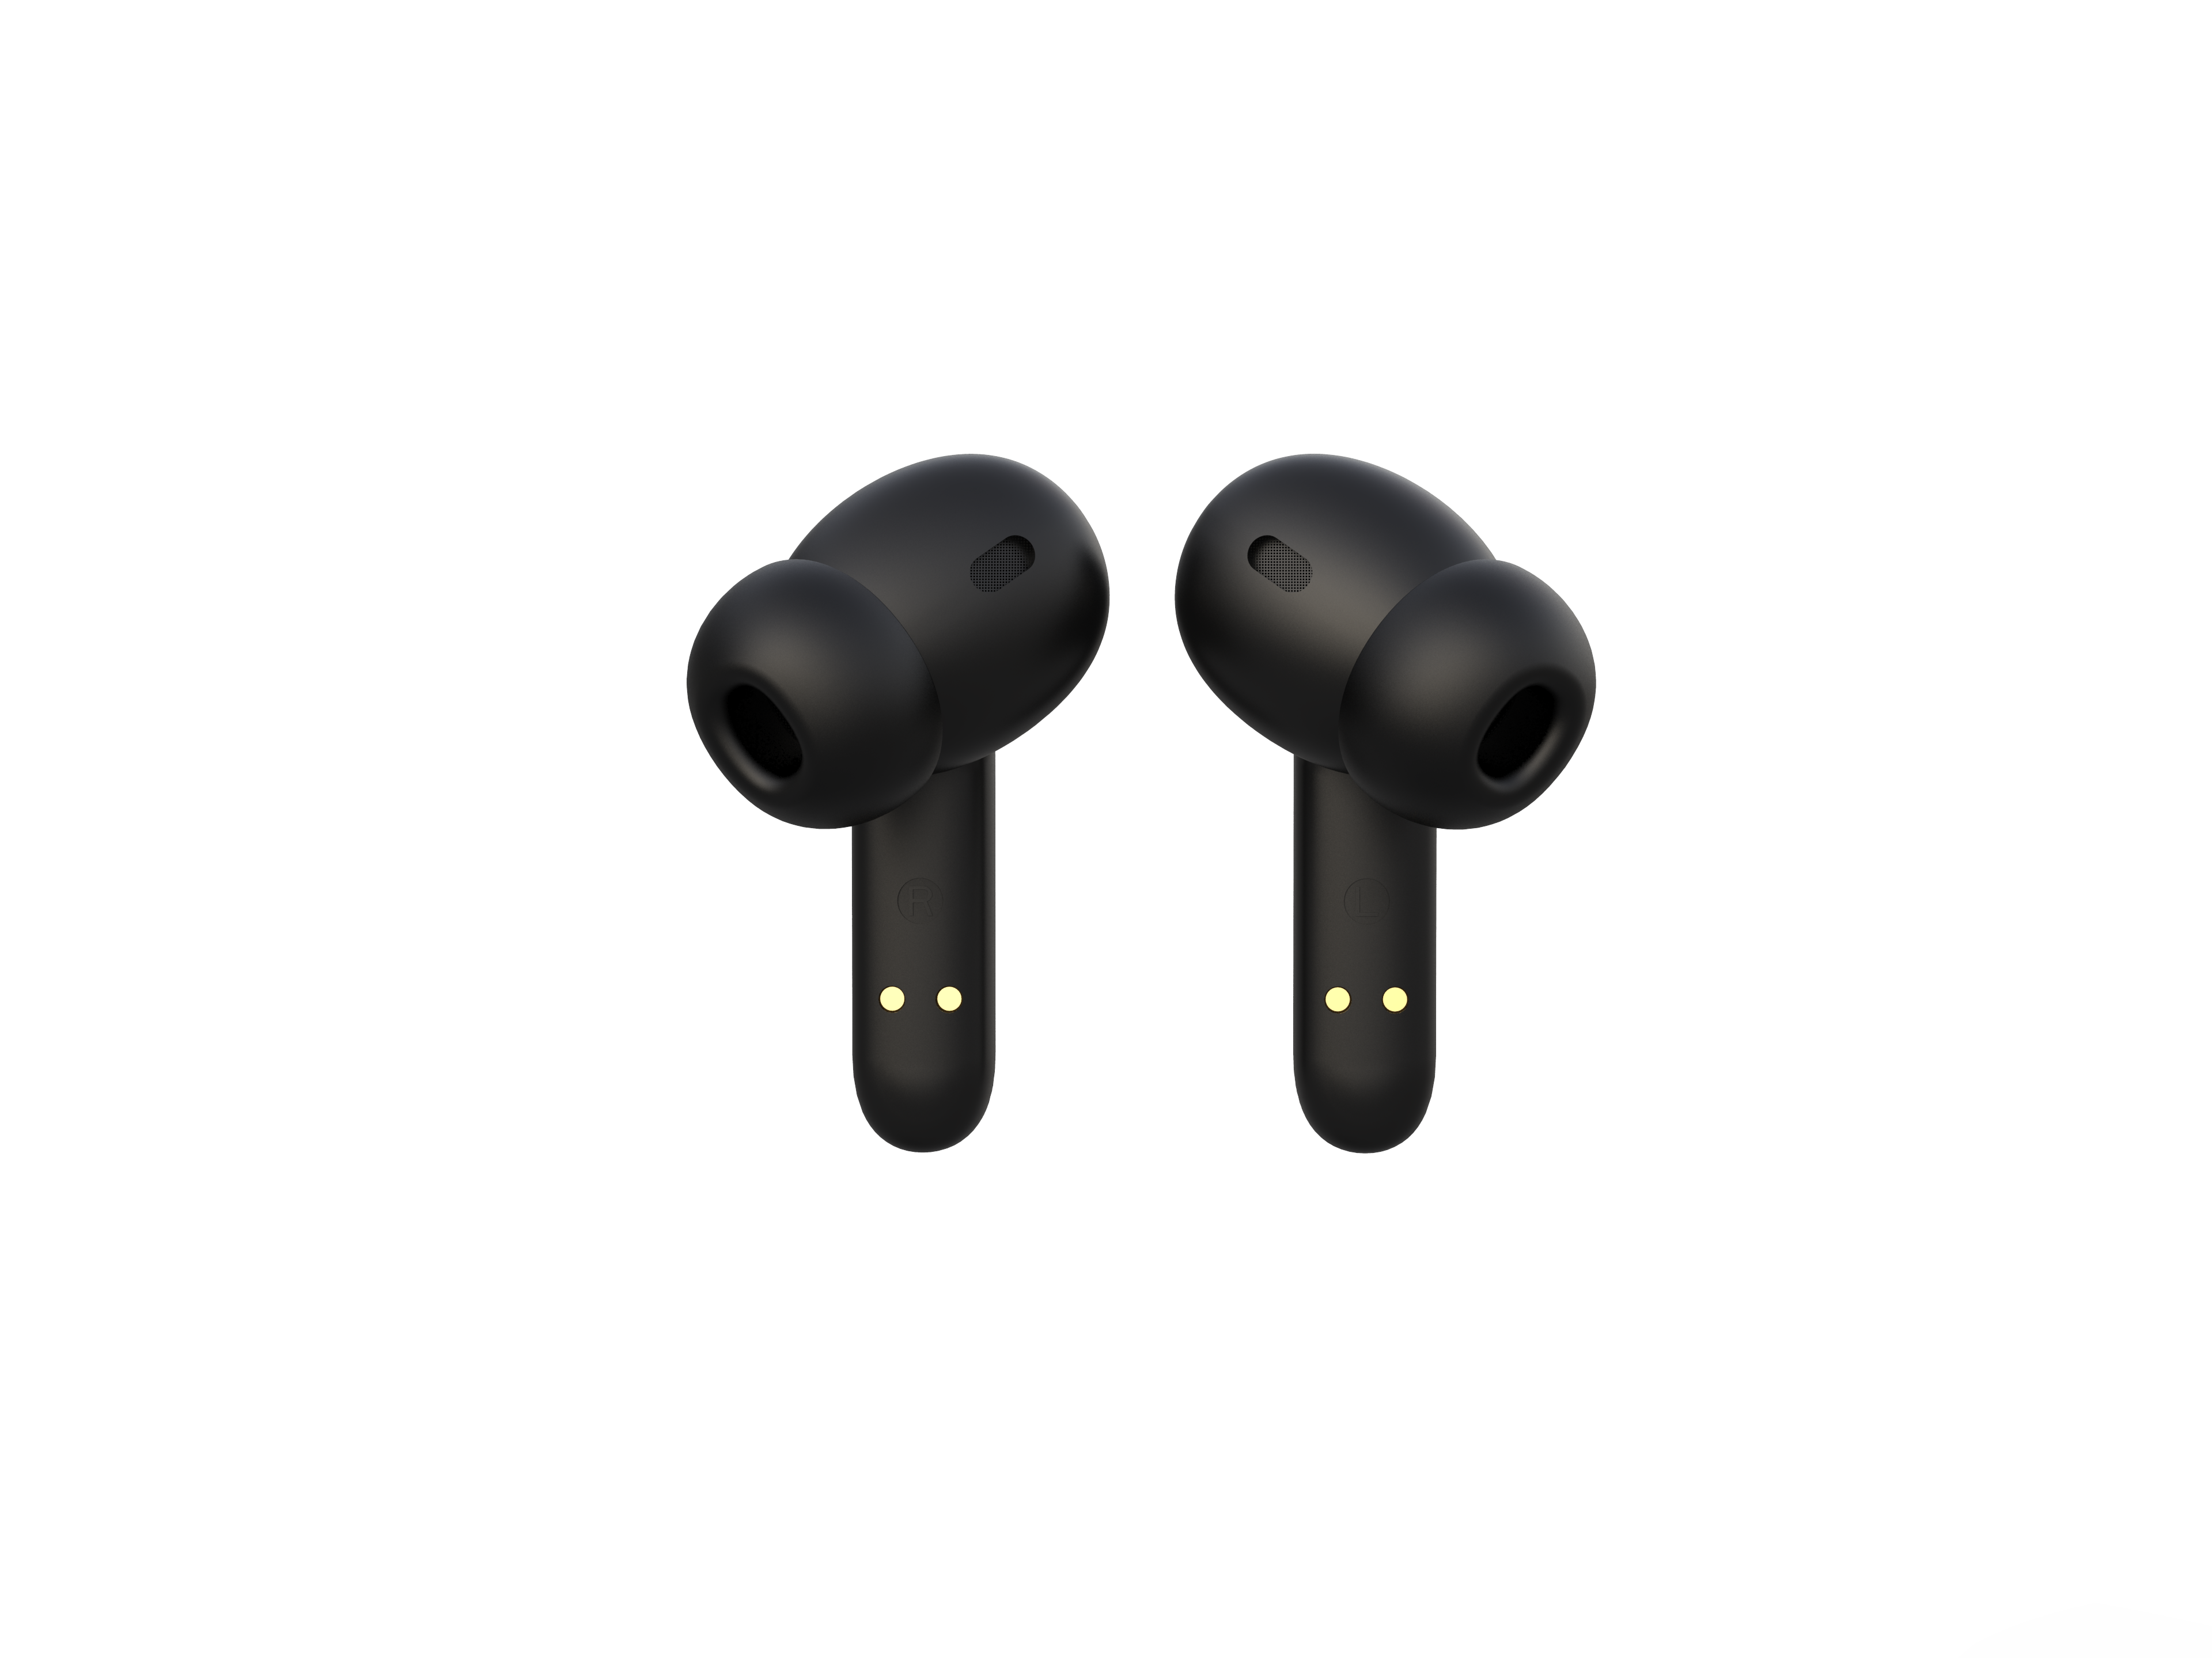 Happyaudio; tws factory; private label tws; china tws factory; OEM Audio Products; Wireless Earbuds Manufacturer; Custom tws manufacturer China;tws technology; audio manufacturing; tws model; budget tws